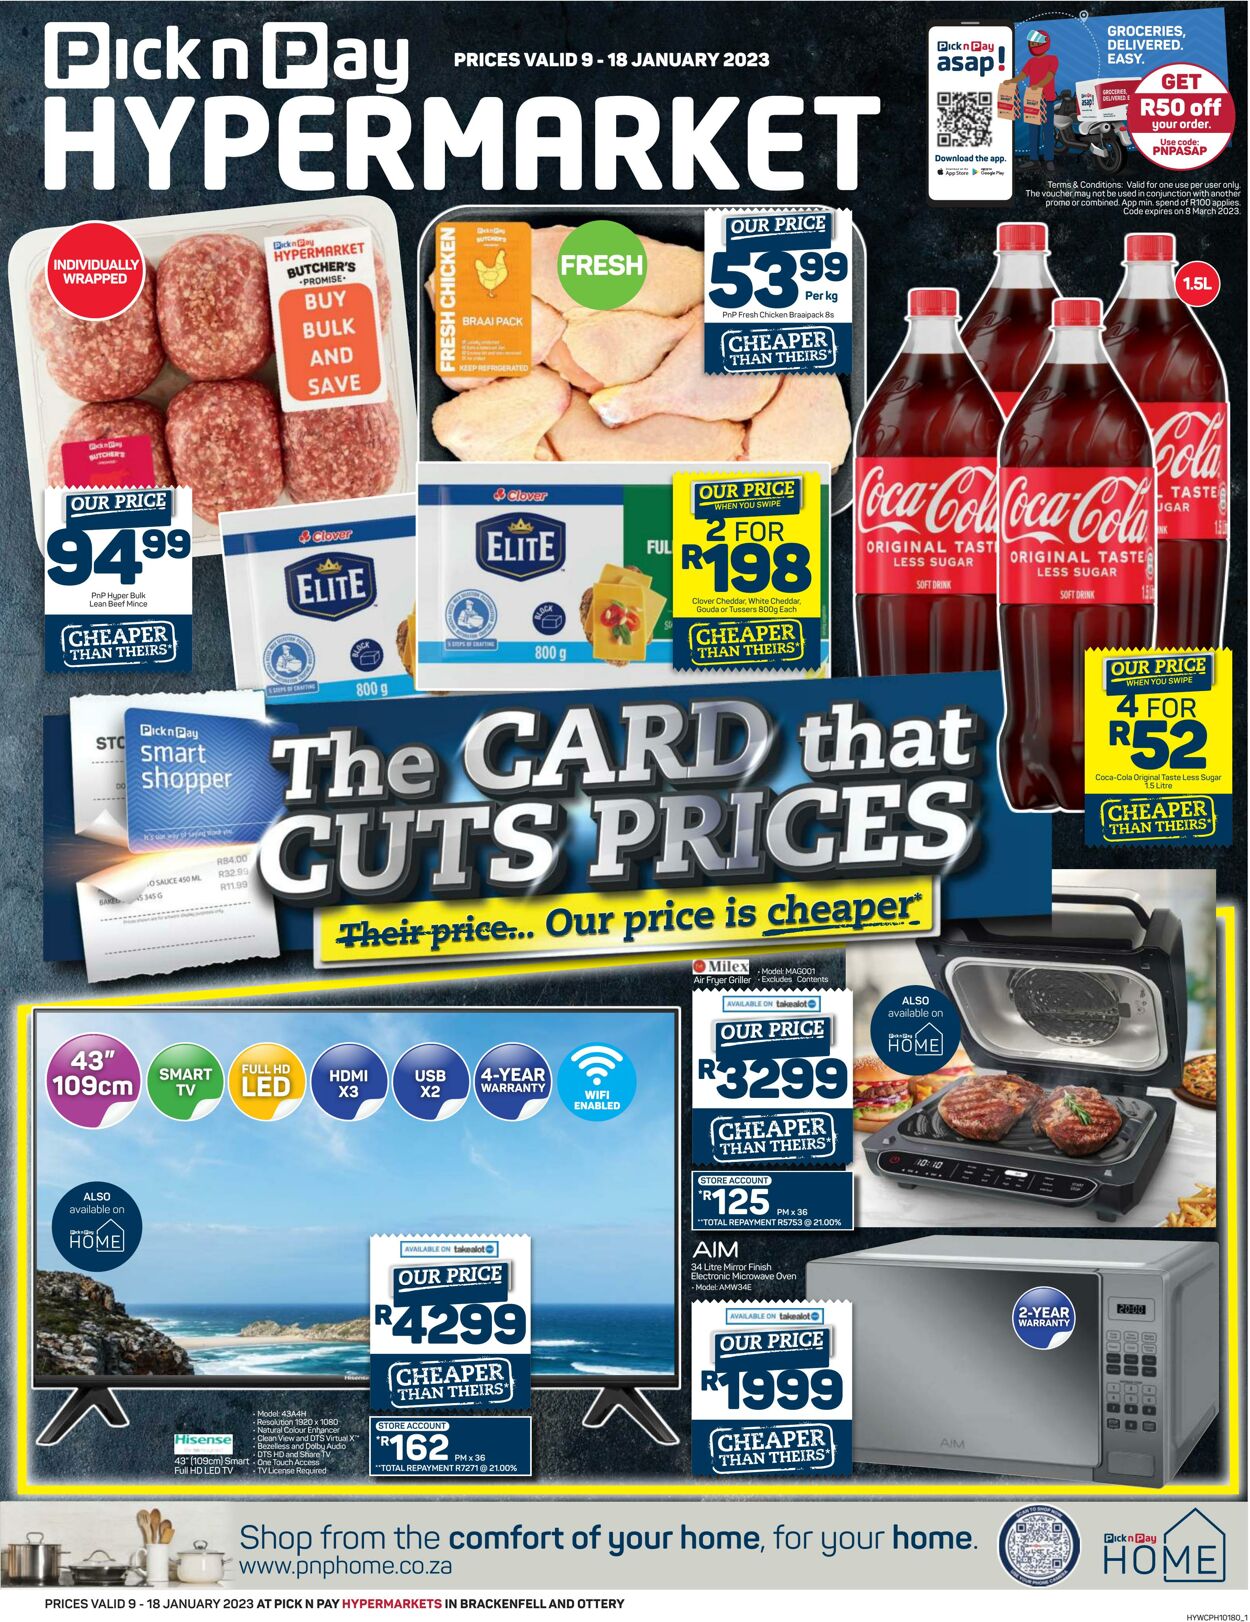 Special Pick n Pay 09.01.2023-18.01.2023